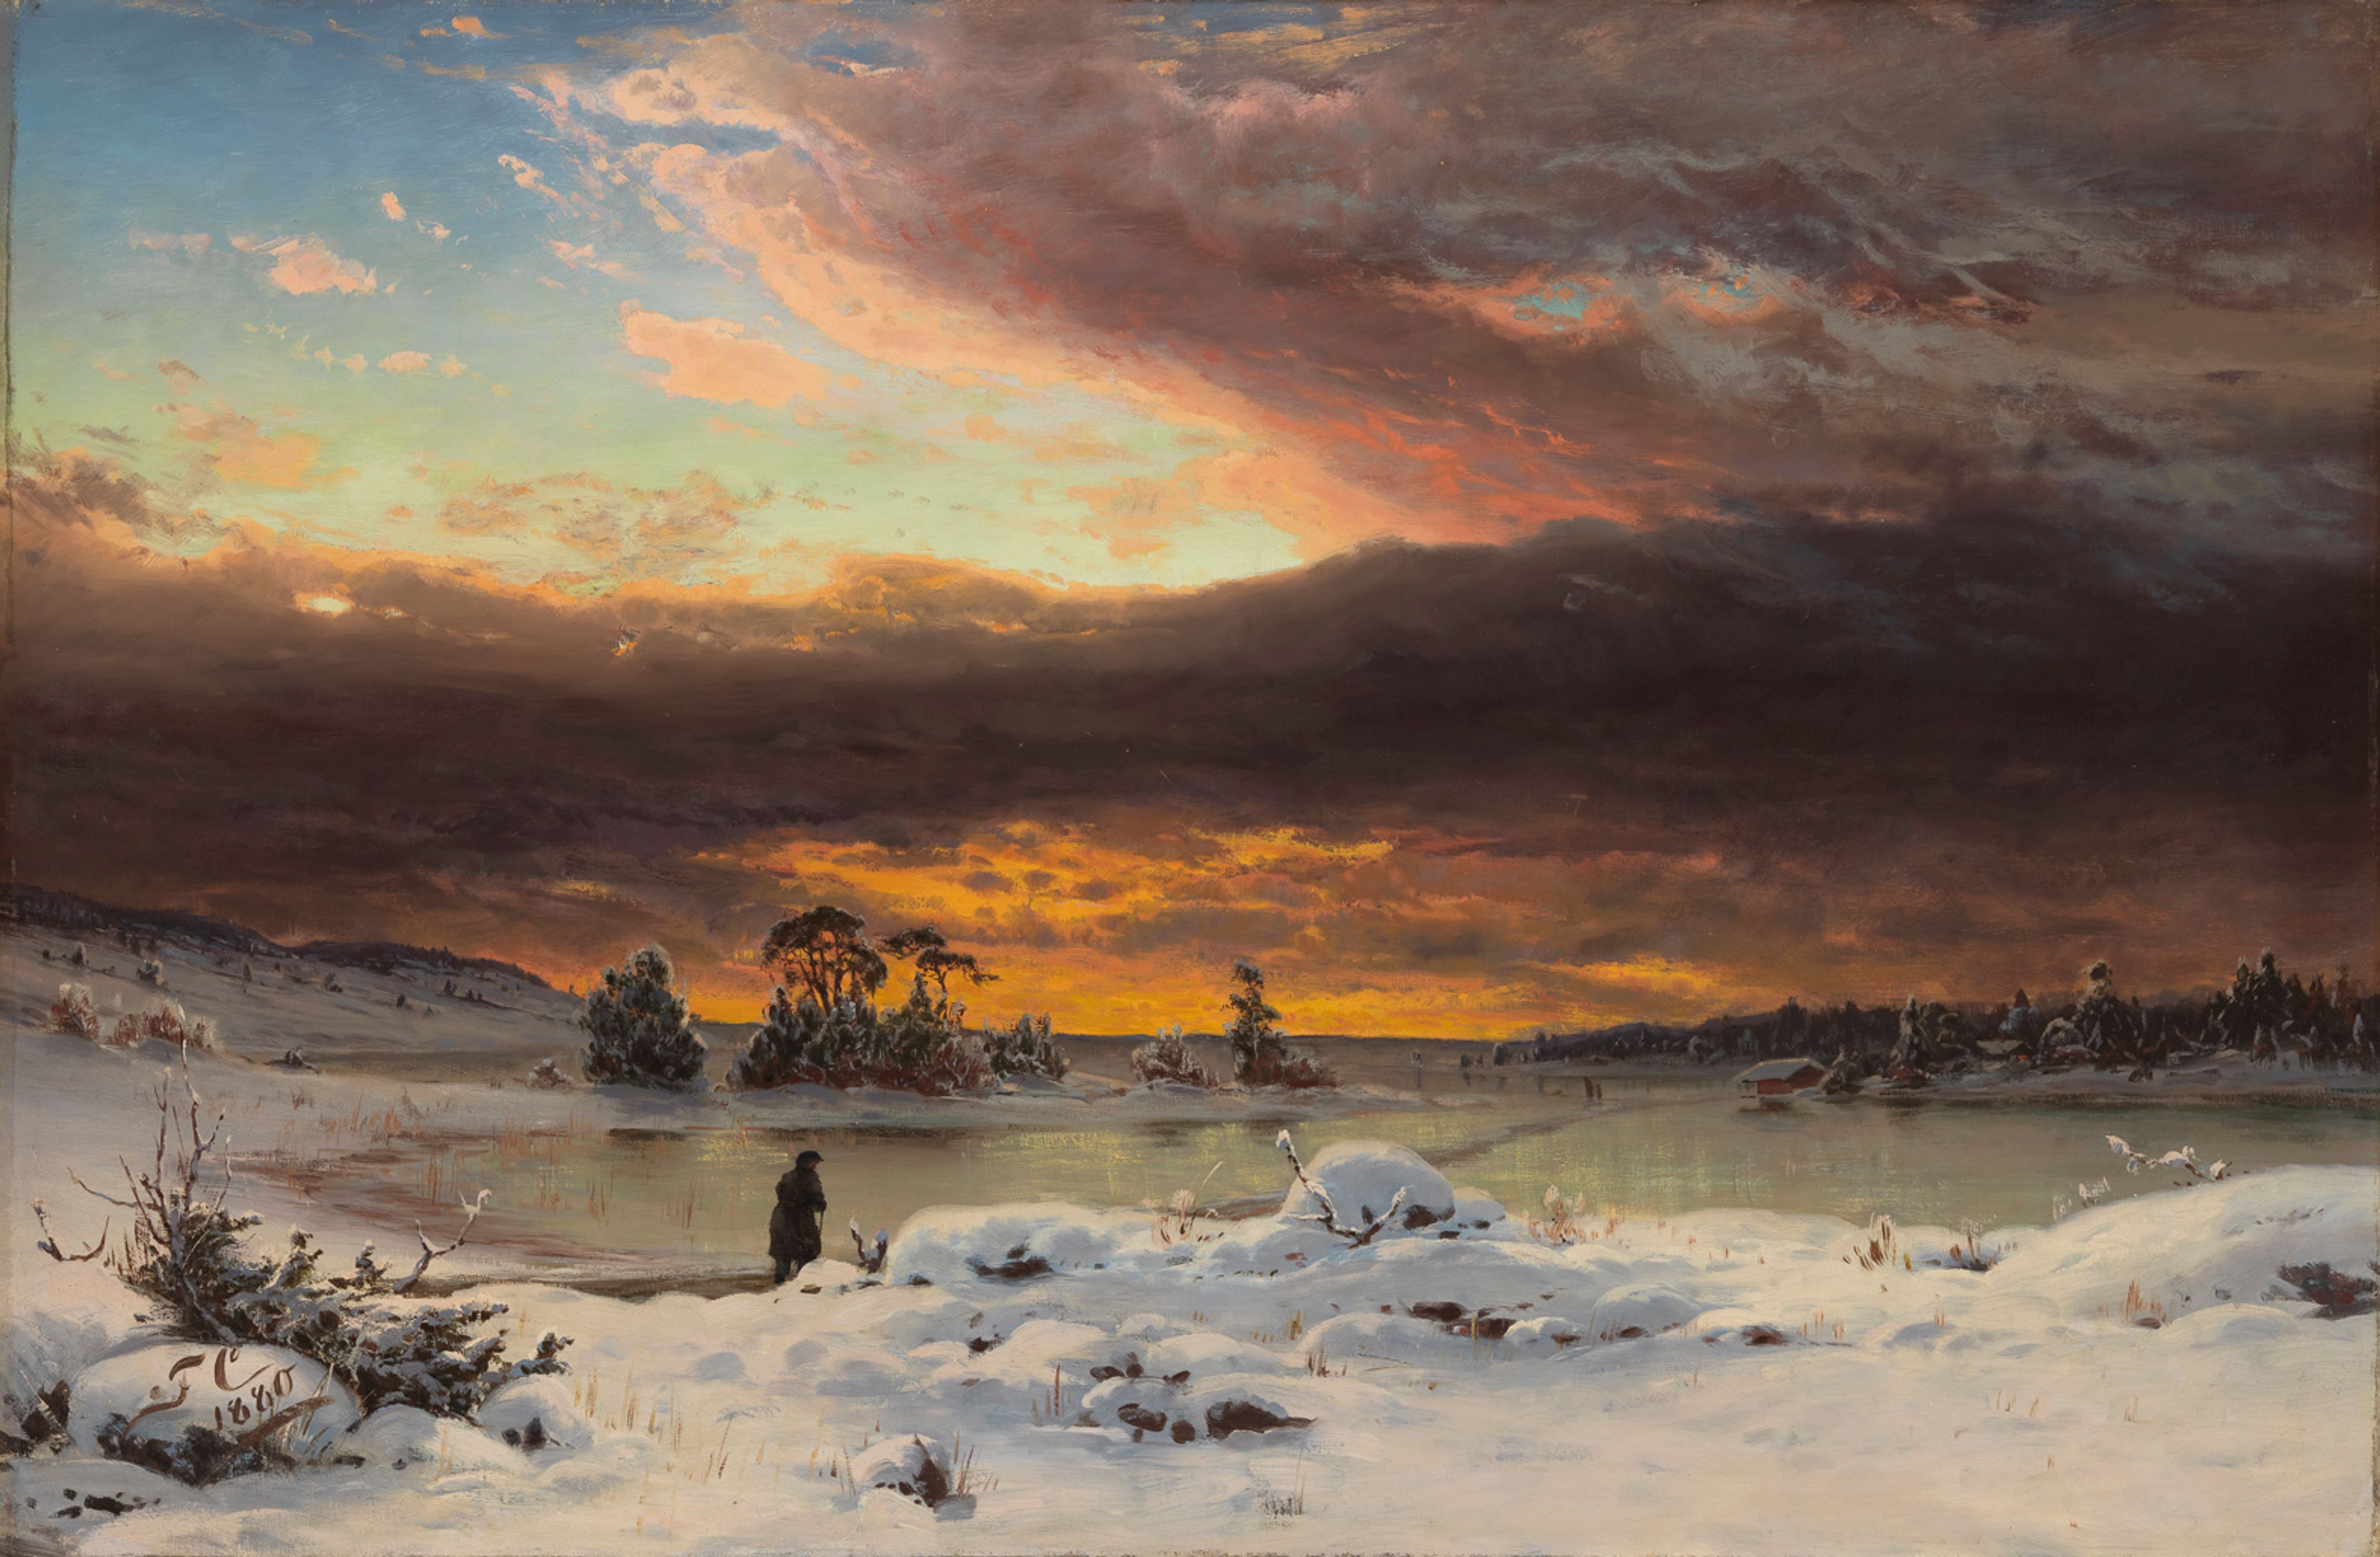 Winter Landscape, Evening Atmosphere by Fanny Churberg - 1880 - 73.5 x 105 cm Finnish National Gallery